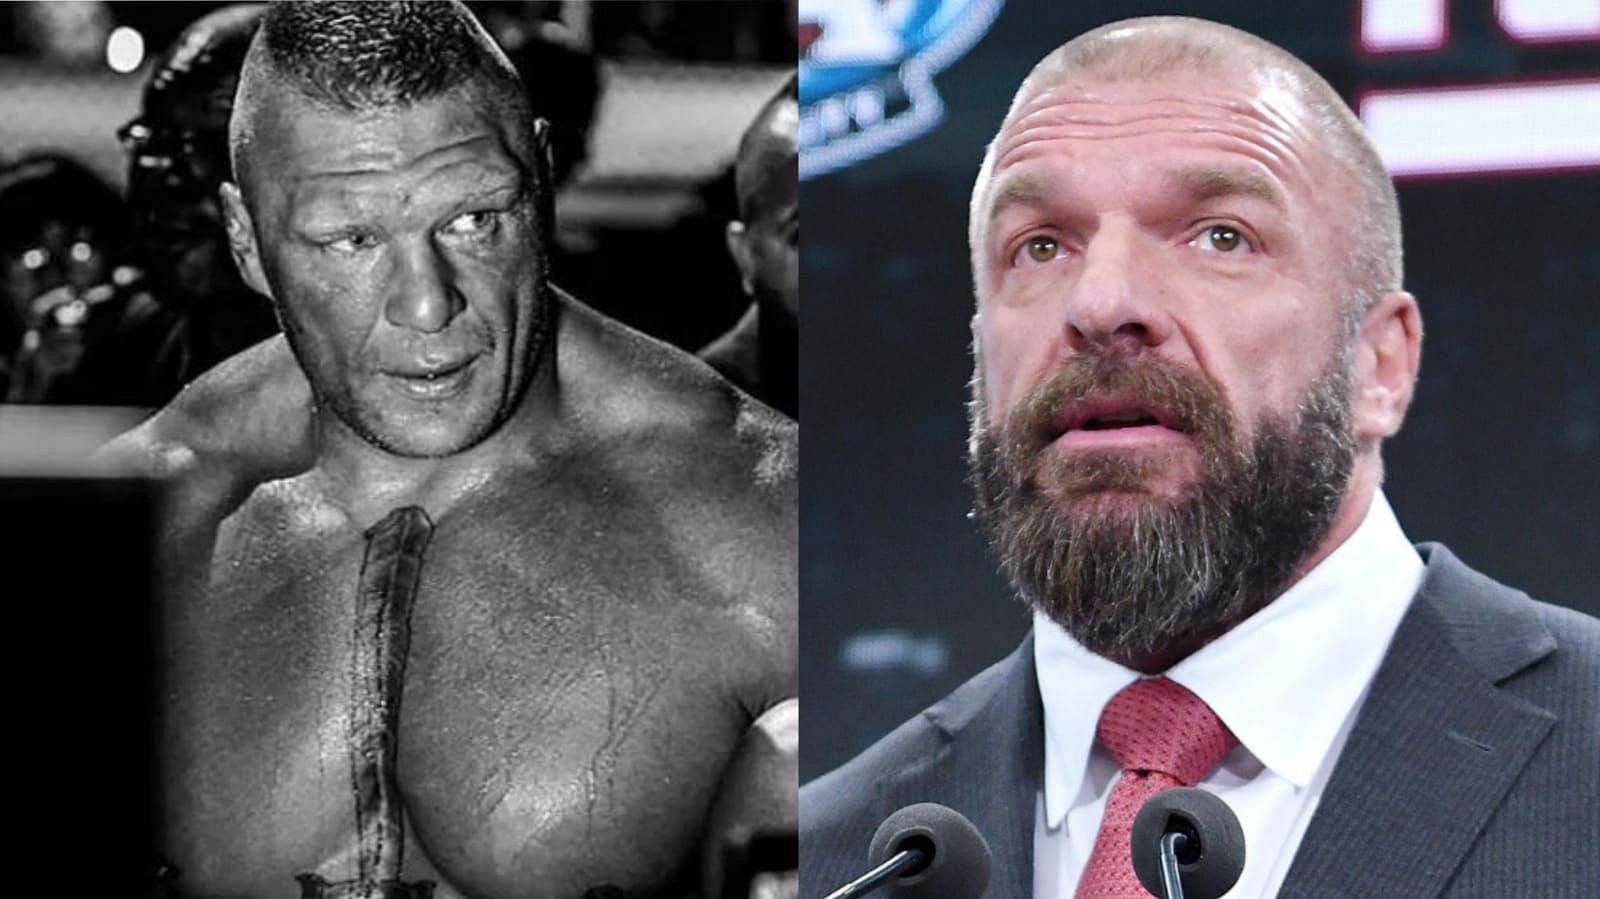 AEW News Roundup ft Brock Lesnar and Triple H